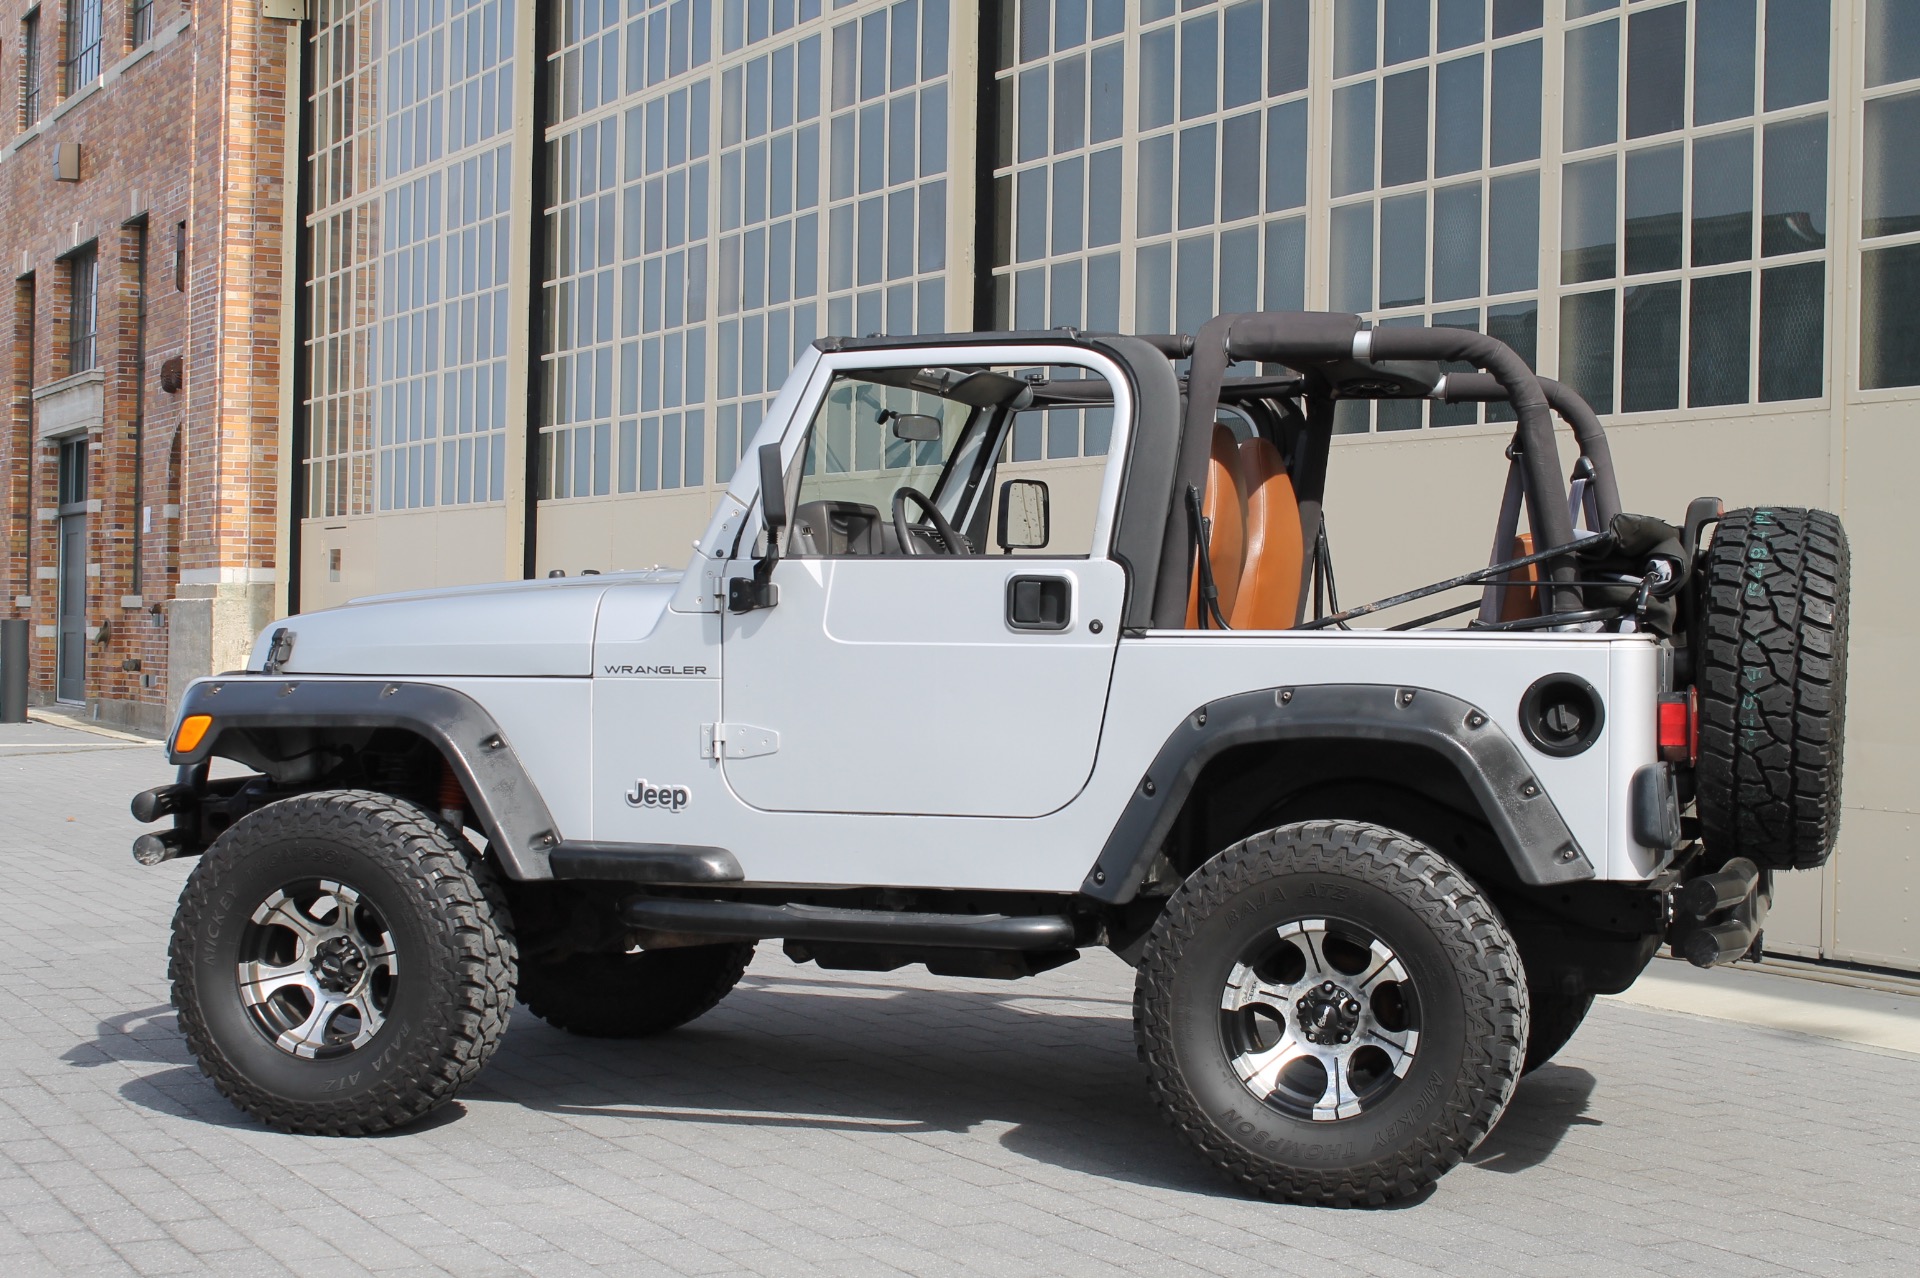 Used 2002 Jeep Wrangler Apex Apex edition For Sale ($10,900) | Legend  Leasing Stock #3581